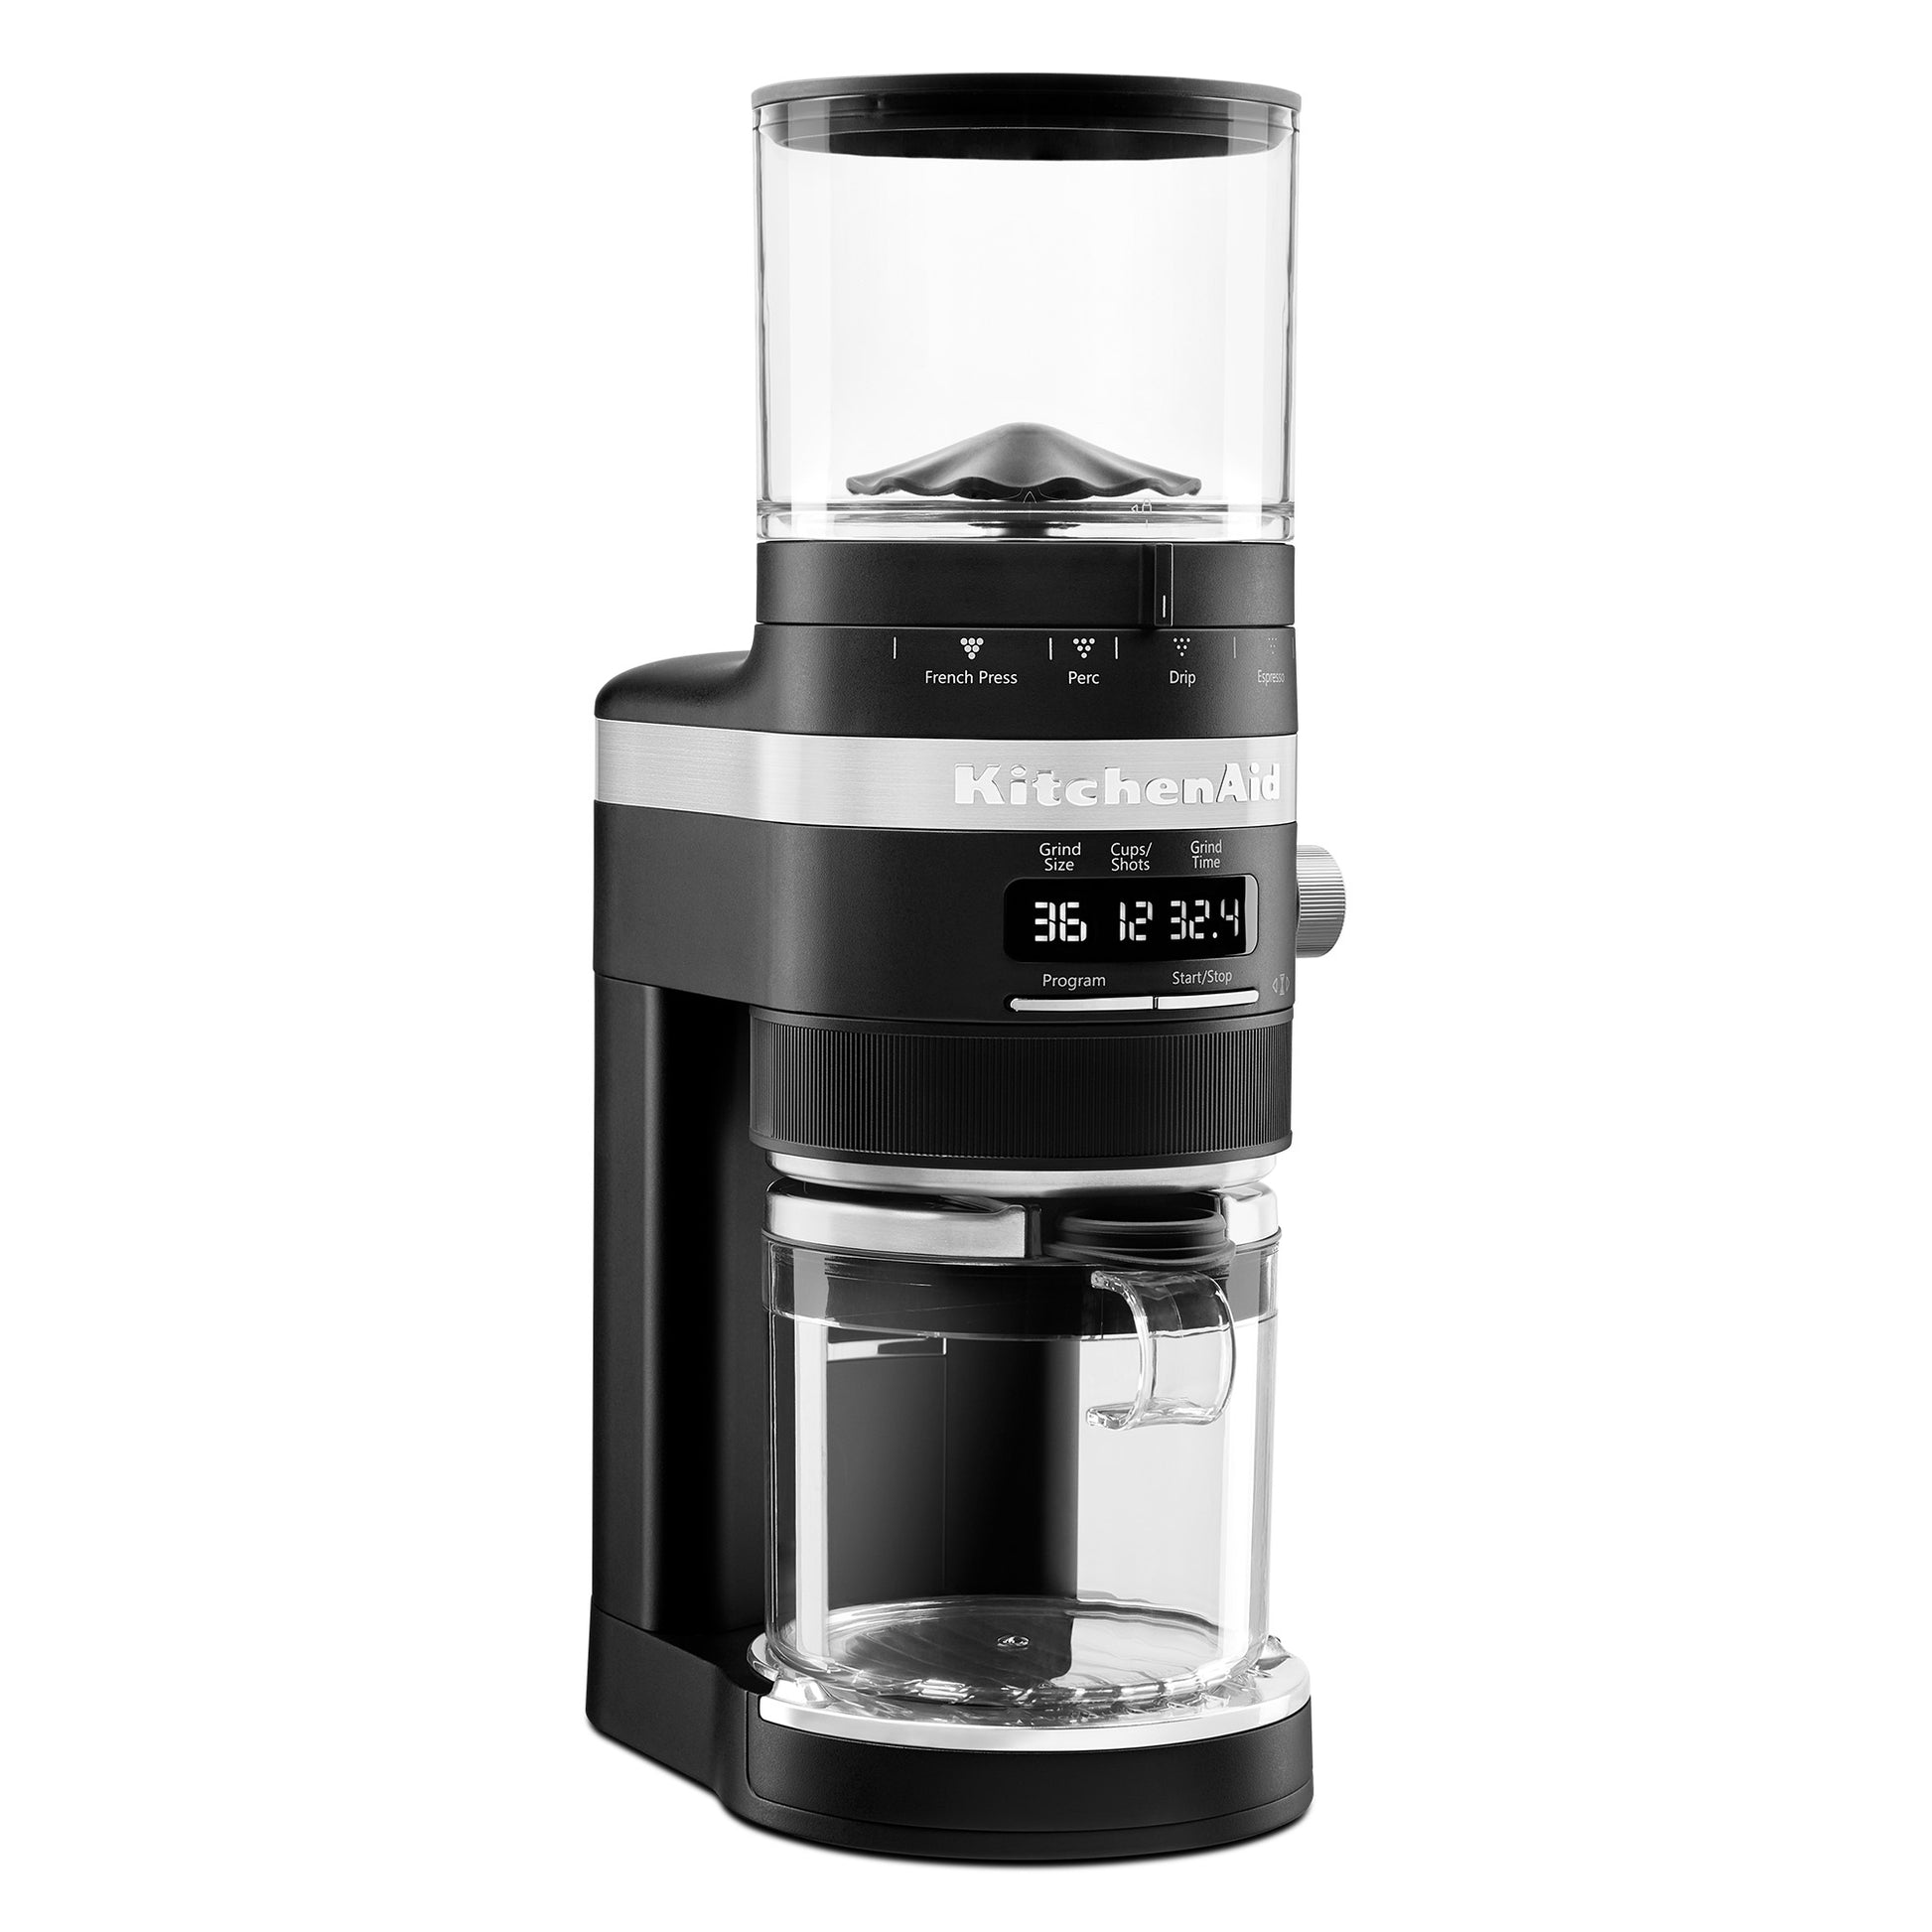 What is a burr coffee grinder?